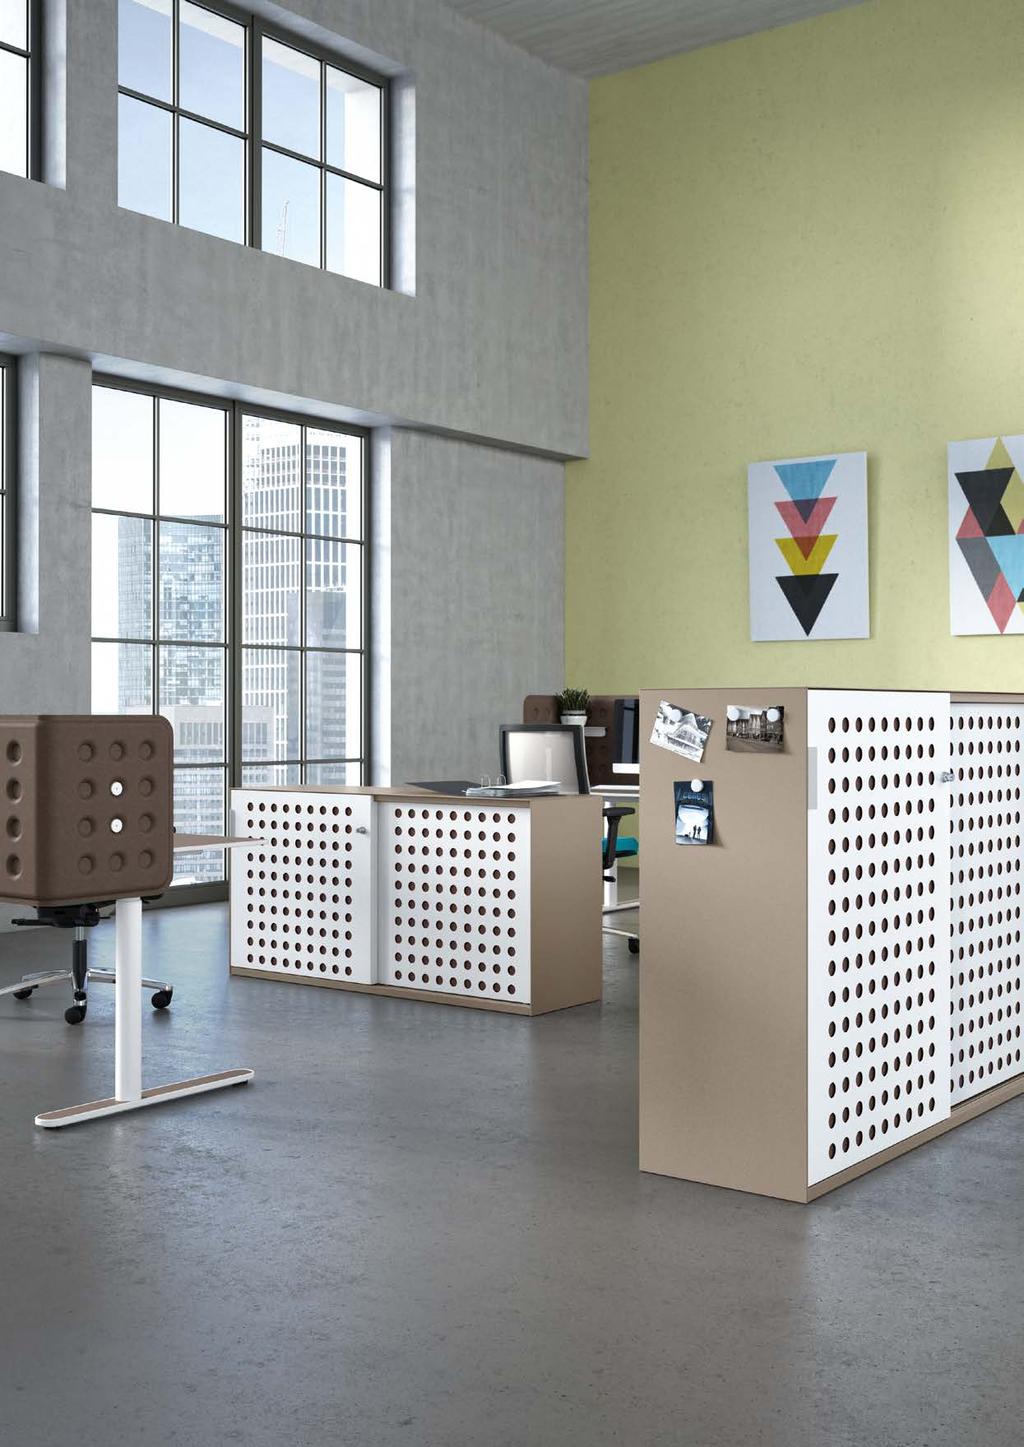 THE DEEP FREQUENCIES ARE ABSORBED, CREATING A BENEFICIAL ROOM ACOUSTIC FOR CONCENTRATED WORK. PRODUCTS: SYS side-sliding tambour, NET.WORK.PLACE stool SYS STORAGE UNITS IN A NEW INTERPRETATION.